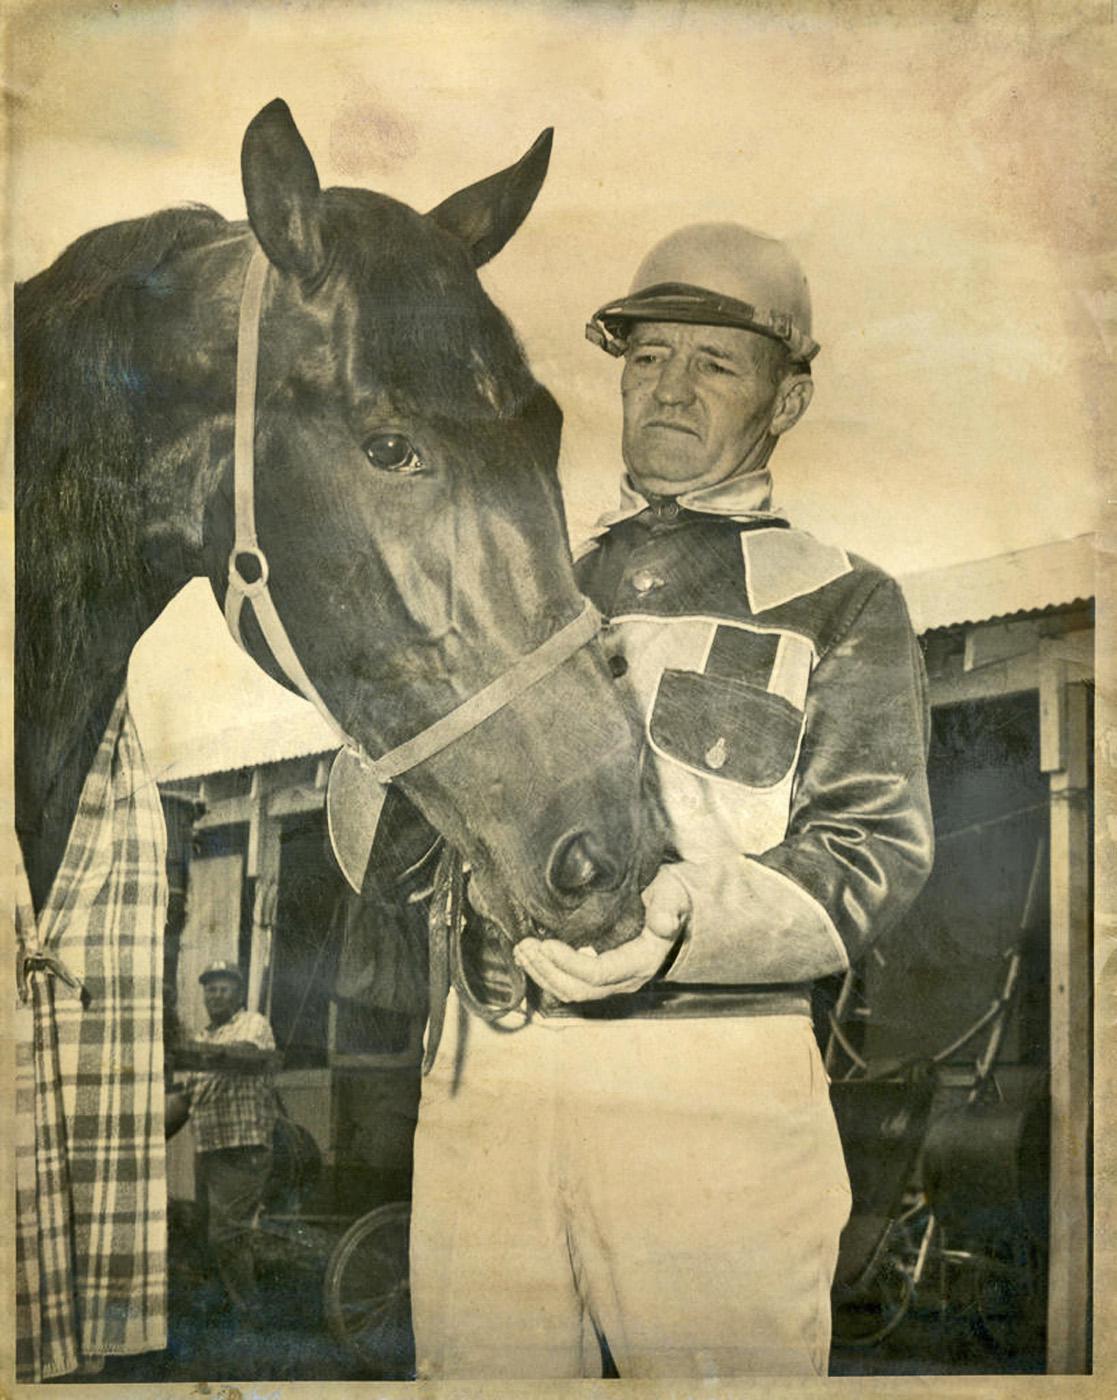 Tom Wilburn, a 1940 animal husbandry graduate from Mississippi State College, is pictured many years ago with his harness-race horse, Trotwood Roy. (Submitted photo)